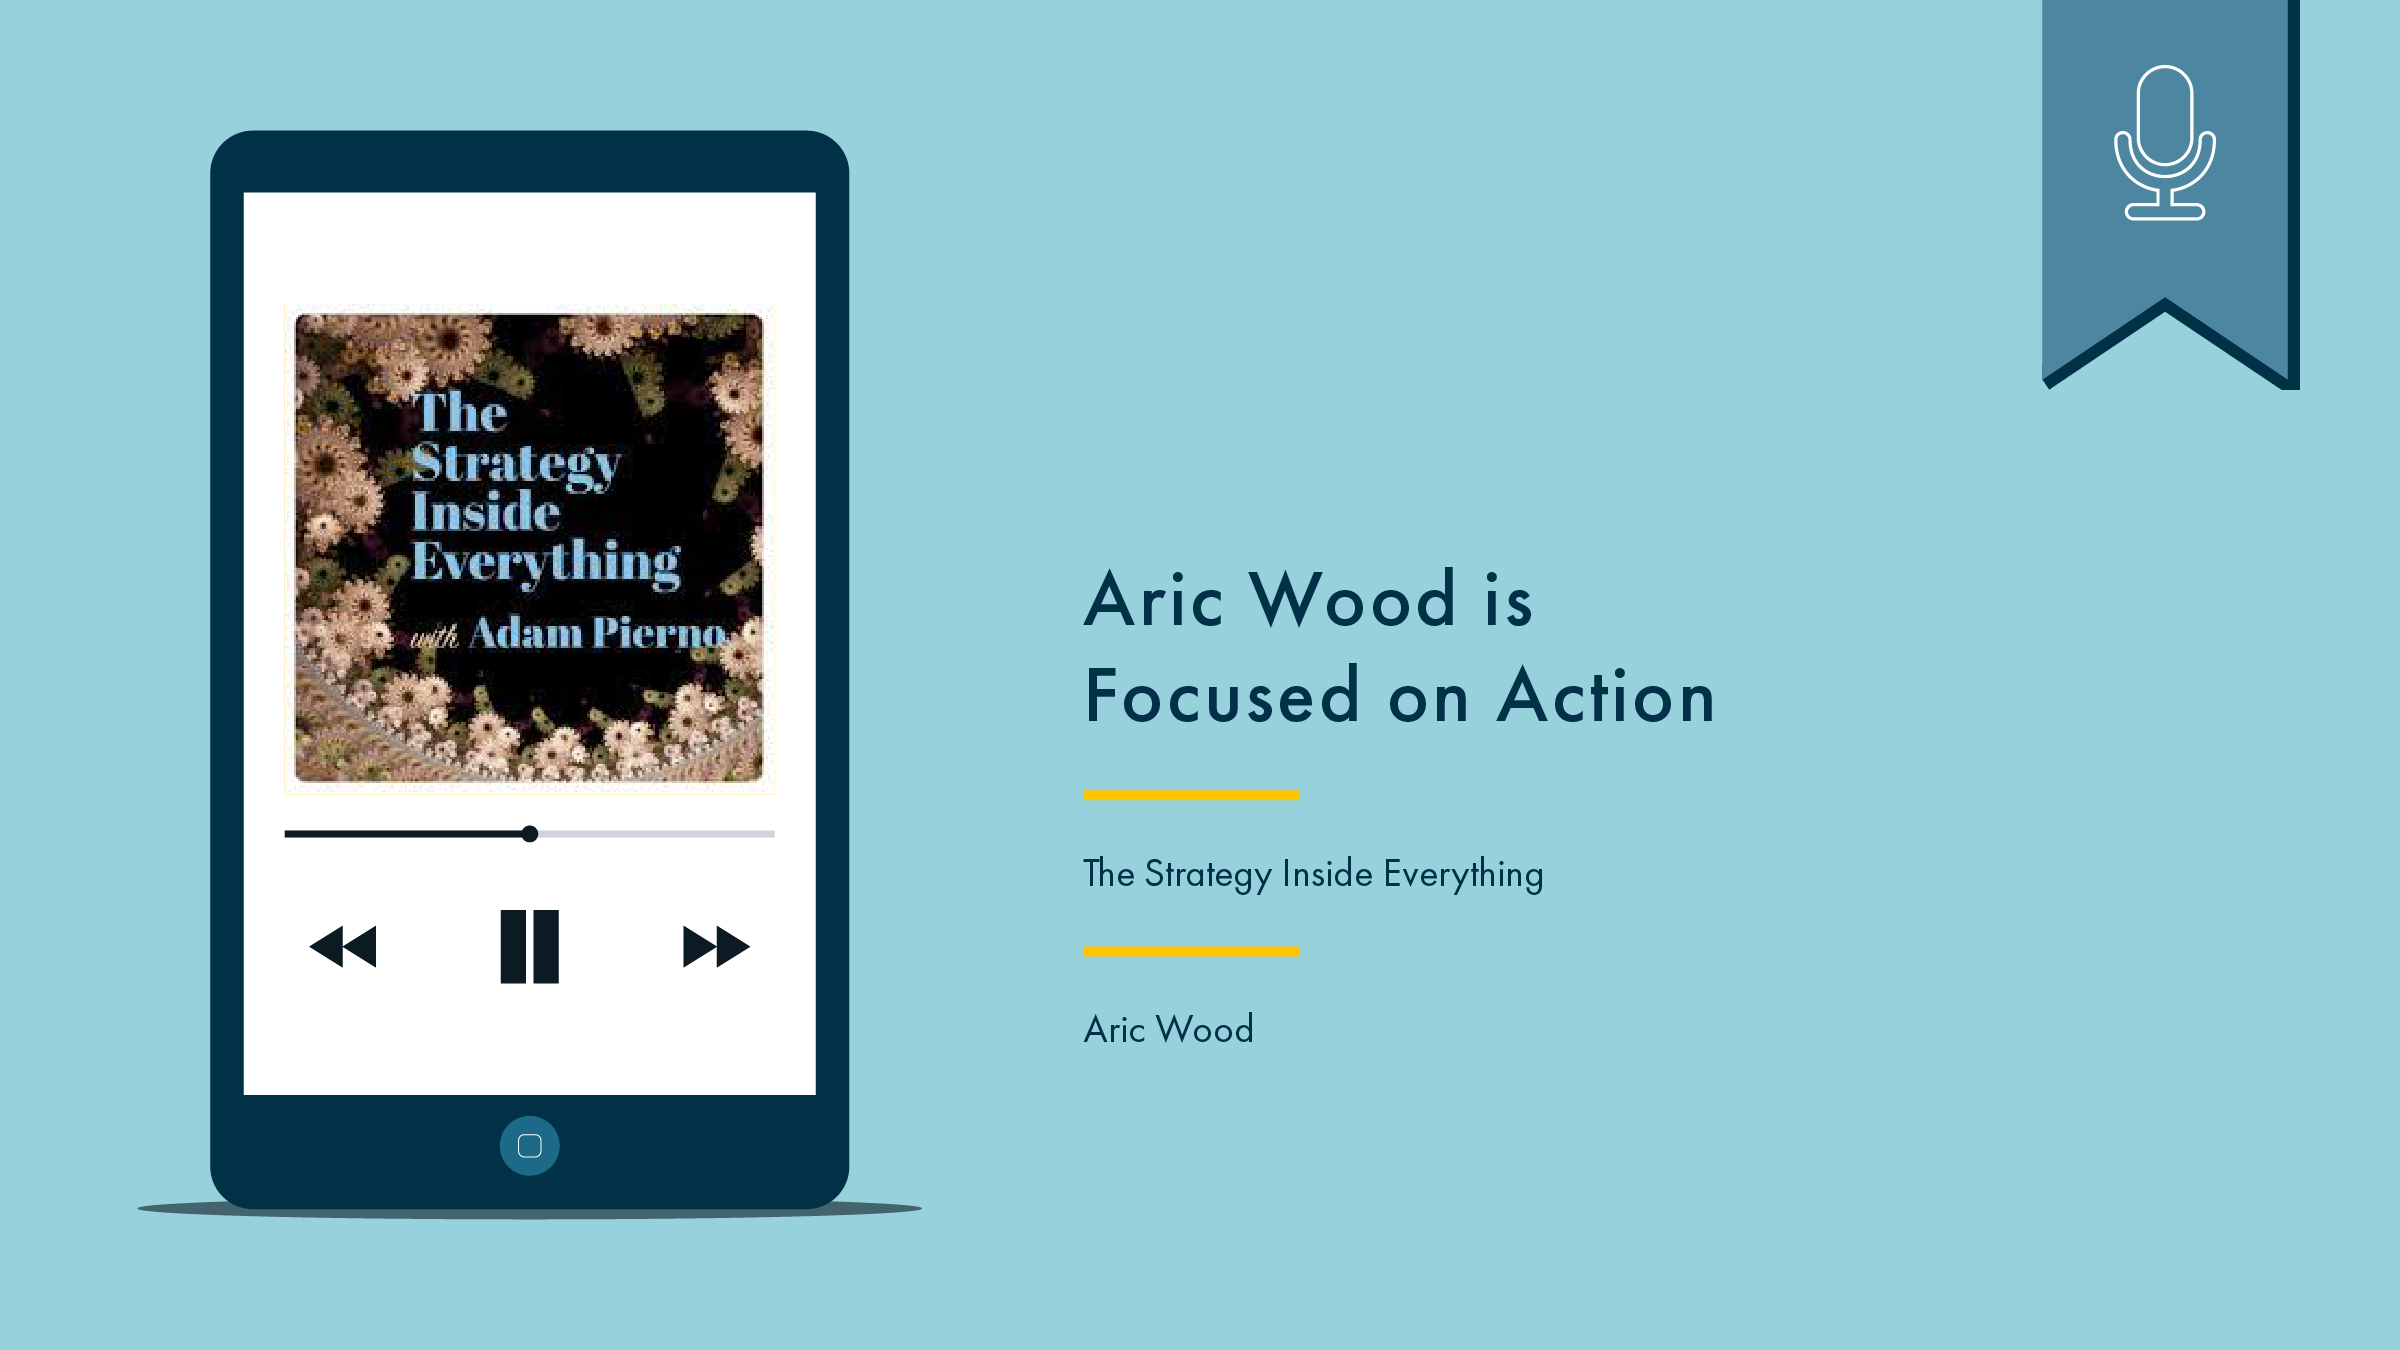 Phone with podcast artwork on the left. On the right reads "Aric Wood is Focused on Action” Above is a blue flag with a white icon denoting that this is a podcast.